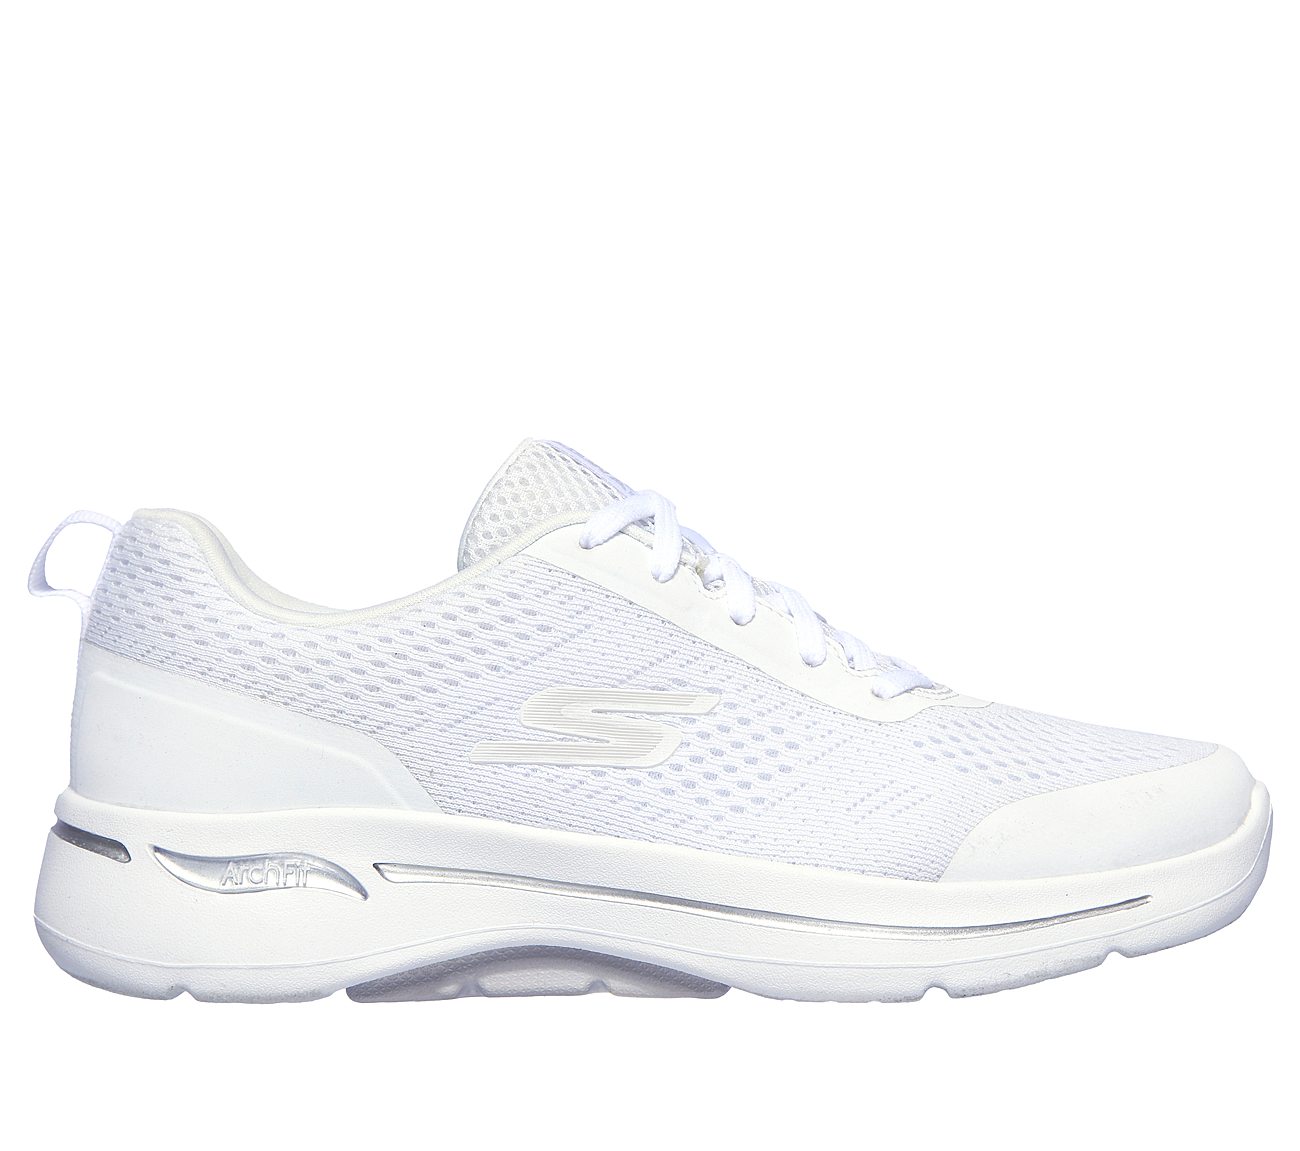 Skechers White Go Walk Arch Fit Motion Breez Womens Lace Up Shoes - Style  ID: 124404